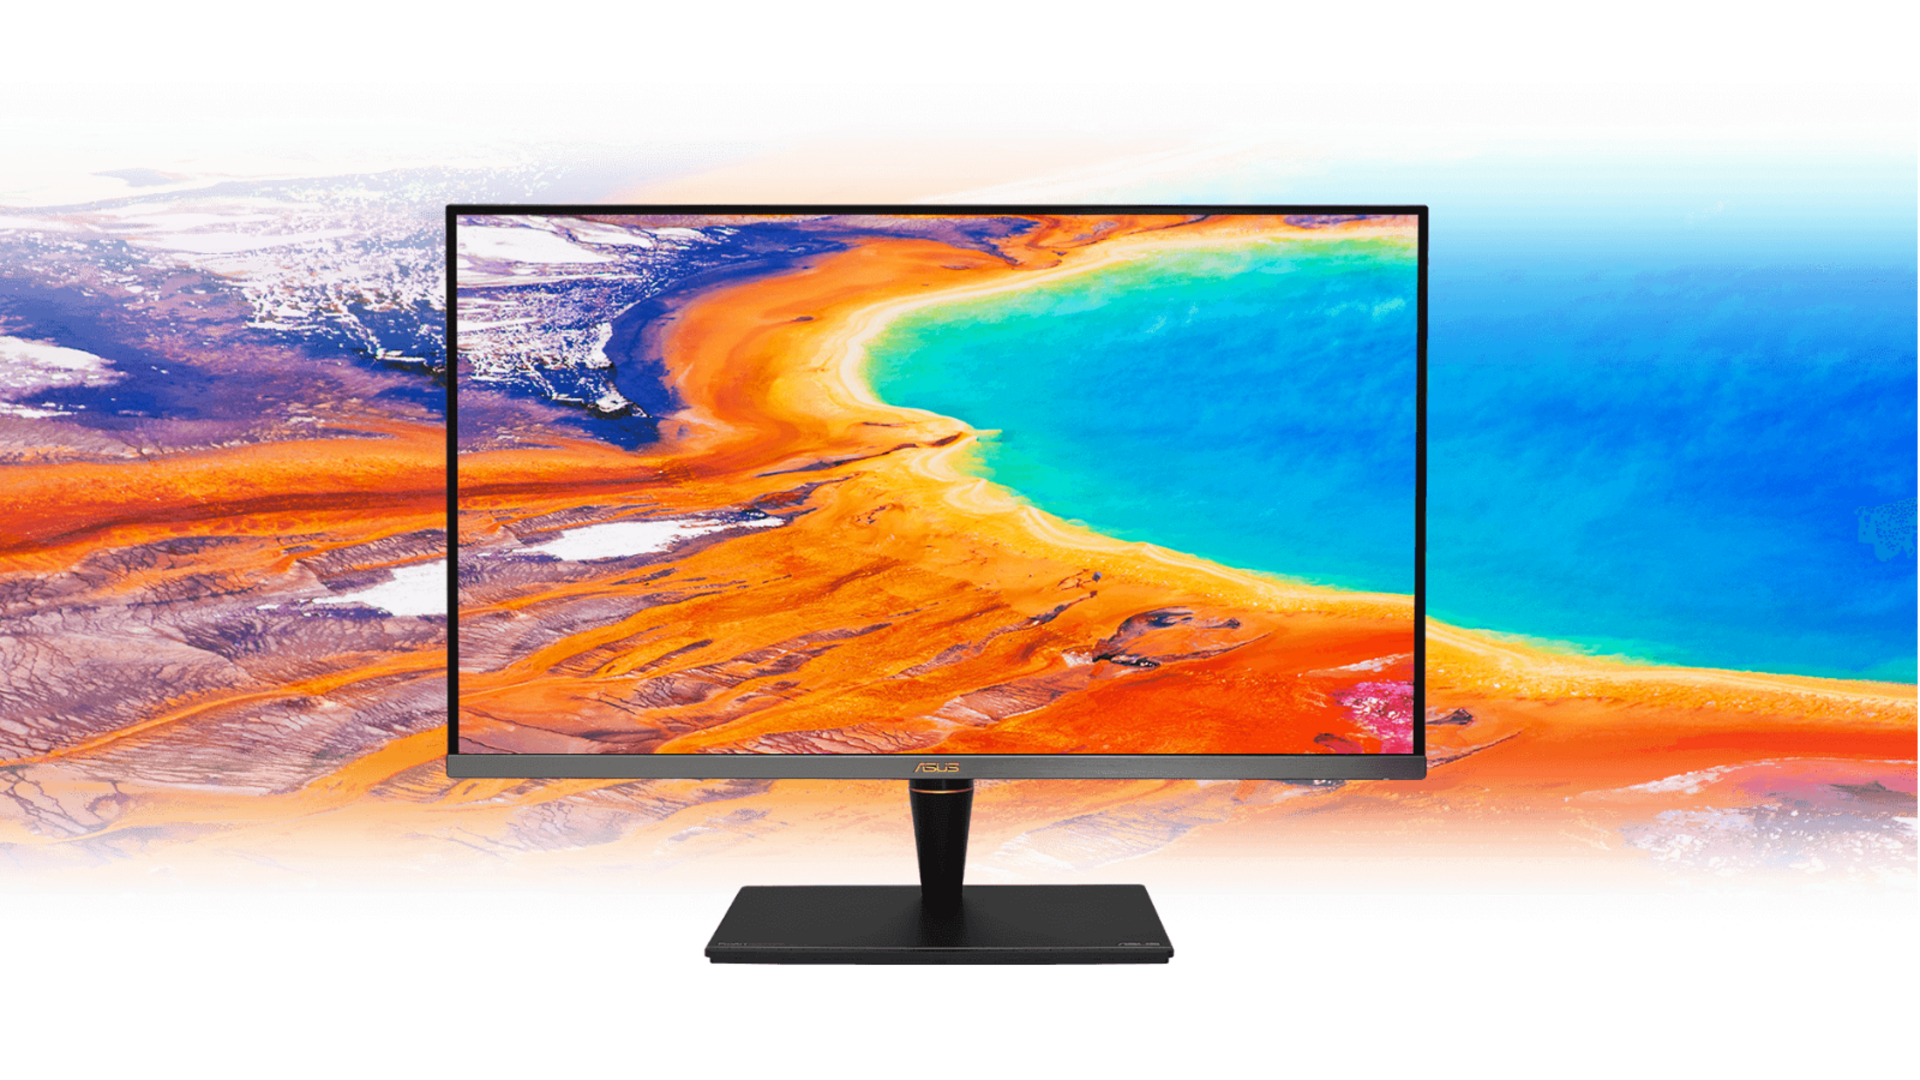 ASUS unveils world's brightest mini-LED monitor: Check features